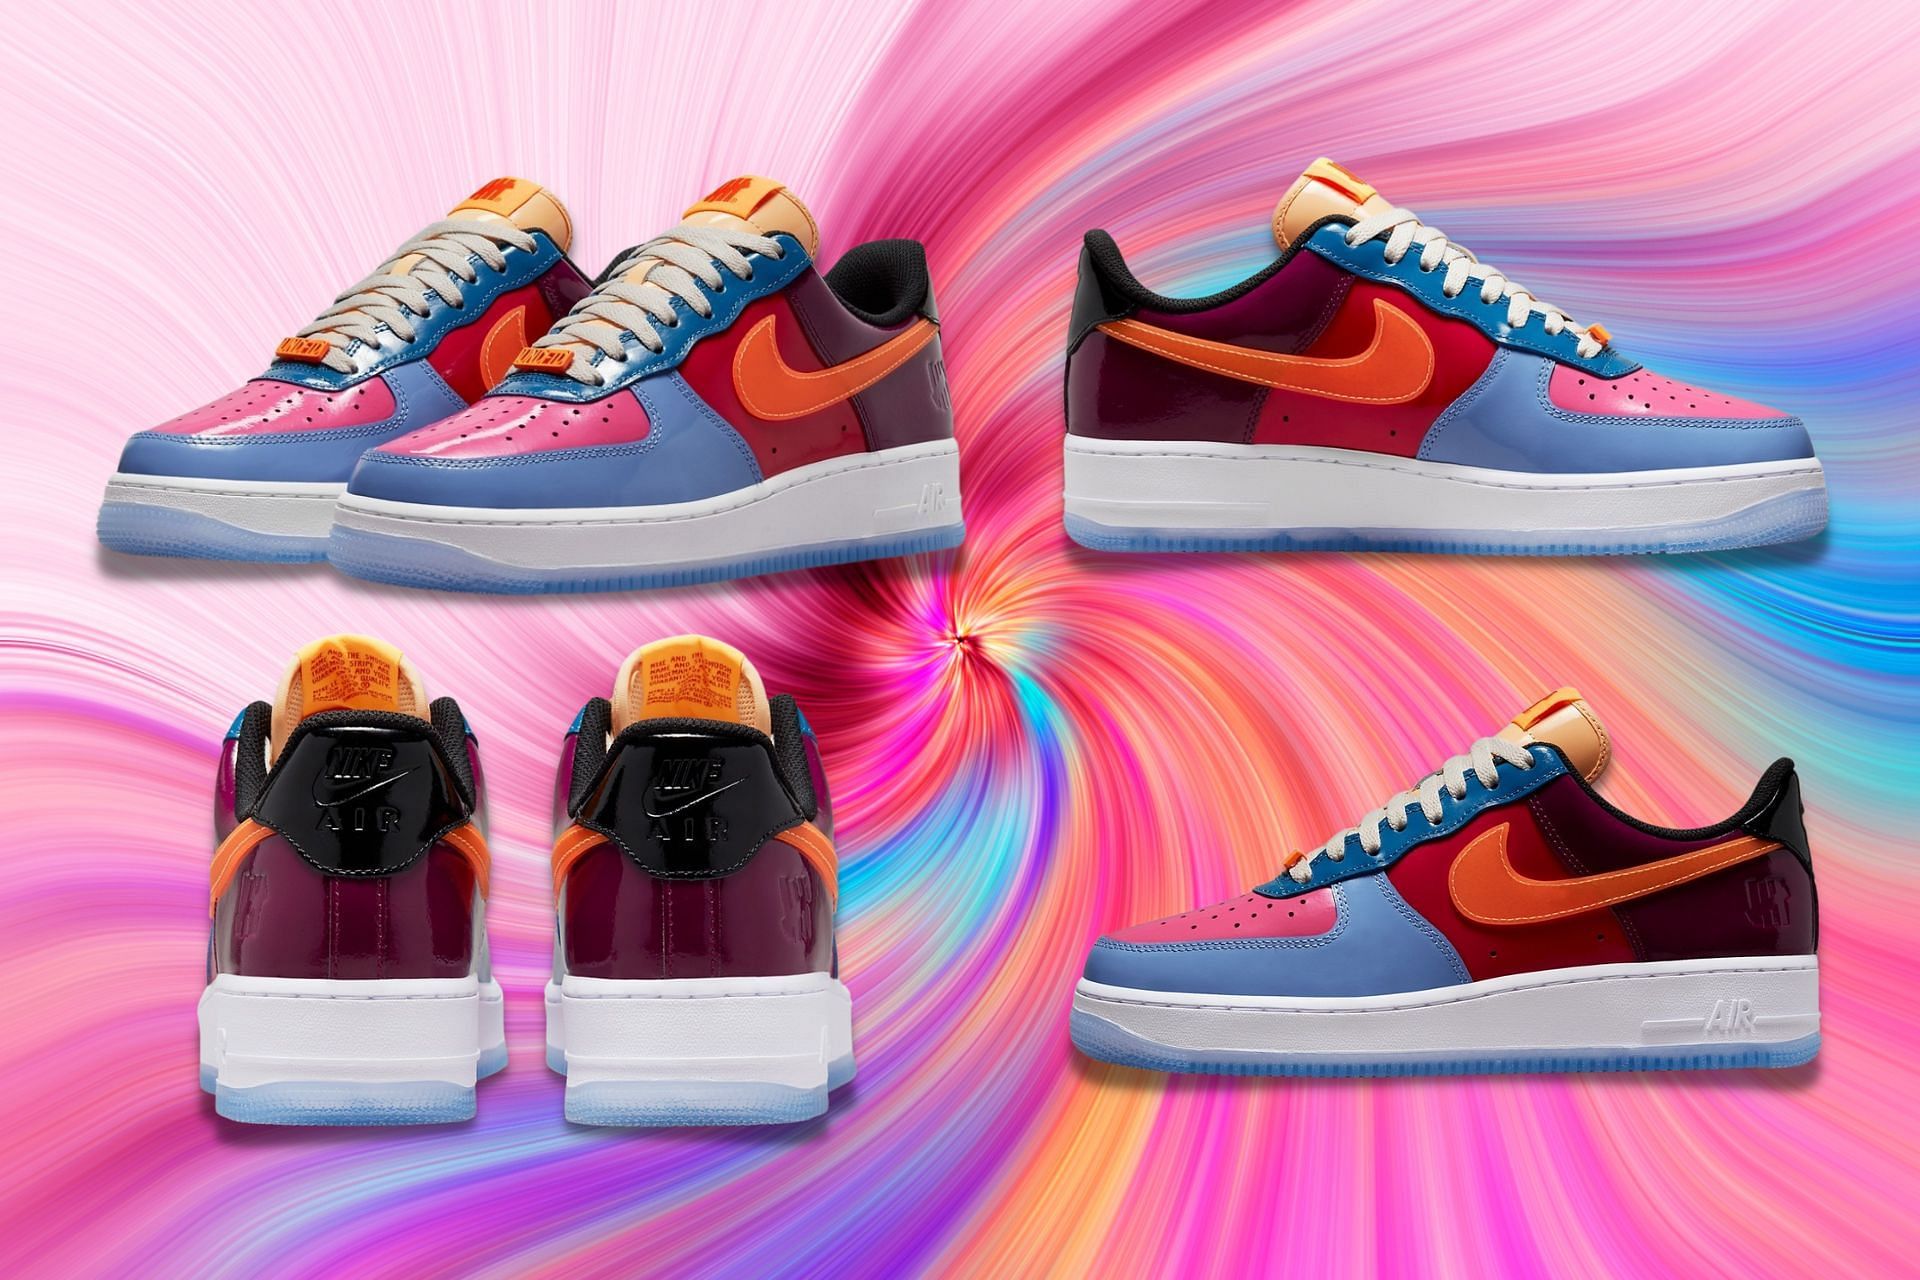 Upcoming multicolored Undefeated x Nike Air Force 1 Low Multi Patent sneakers (Image via Sportskeeda)